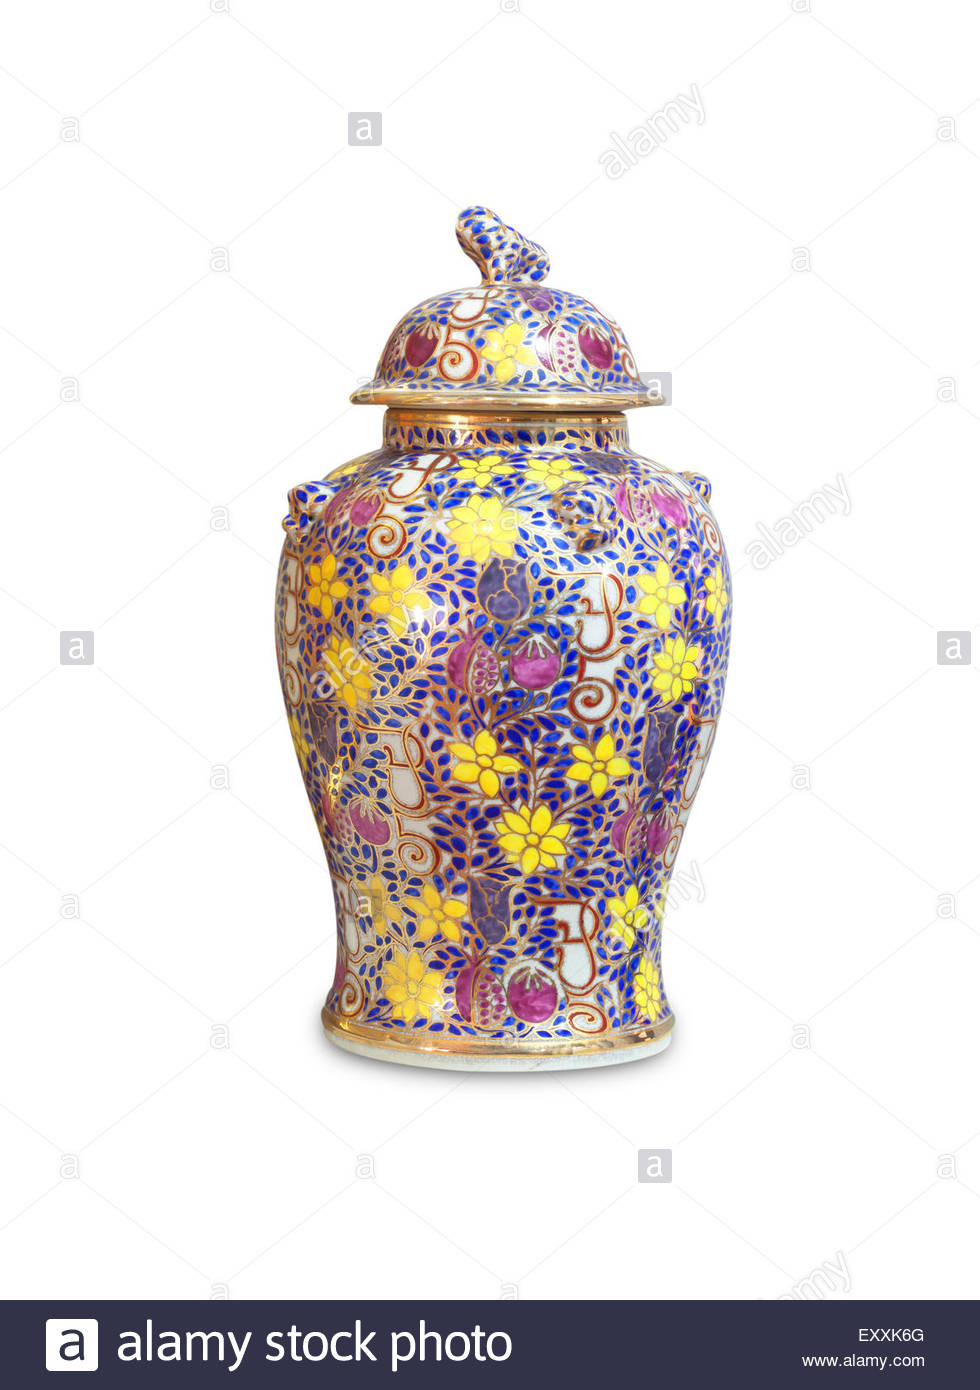 16 Perfect Antique Chinese Vases for Sale 2022 free download antique chinese vases for sale of antique chinese vase metal stock photos antique chinese vase metal pertaining to ceramic flower vase isolated on white background stock image